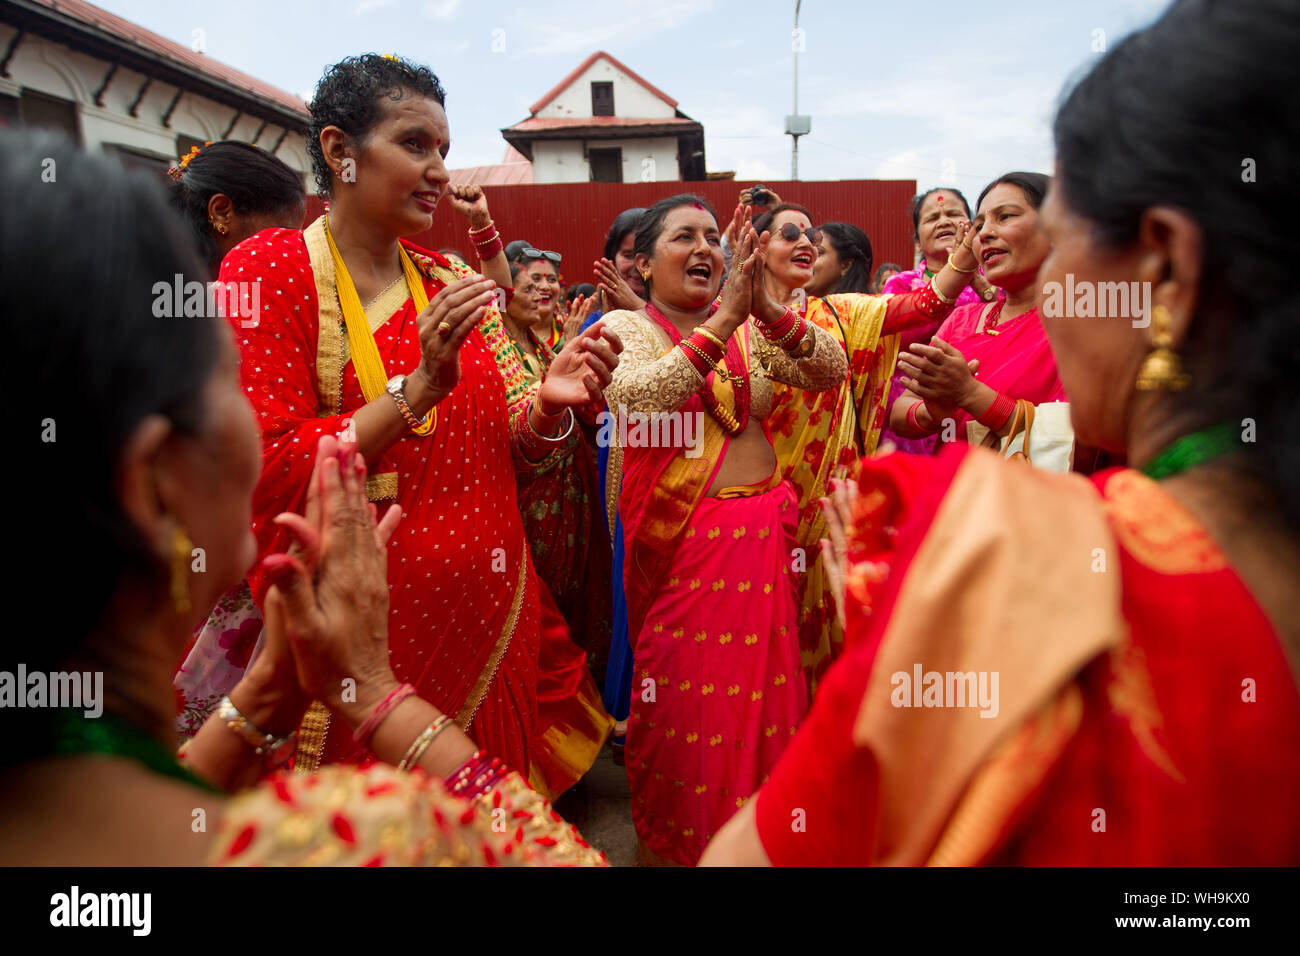 Kathmandu, Nepal. 2nd Sep, 2019. Women dance during celebration of Teej festival at the premises of Pashupatinath Temple in Kathmandu, Nepal, Sept. 2, 2019. Nepali women on Monday celebrated the Hindu festival of Teej, during which married women fast for their husbands' long life and good health while the unmarried pray for ideal husbands. Credit: Sulav Shrestha/Xinhua Stock Photo